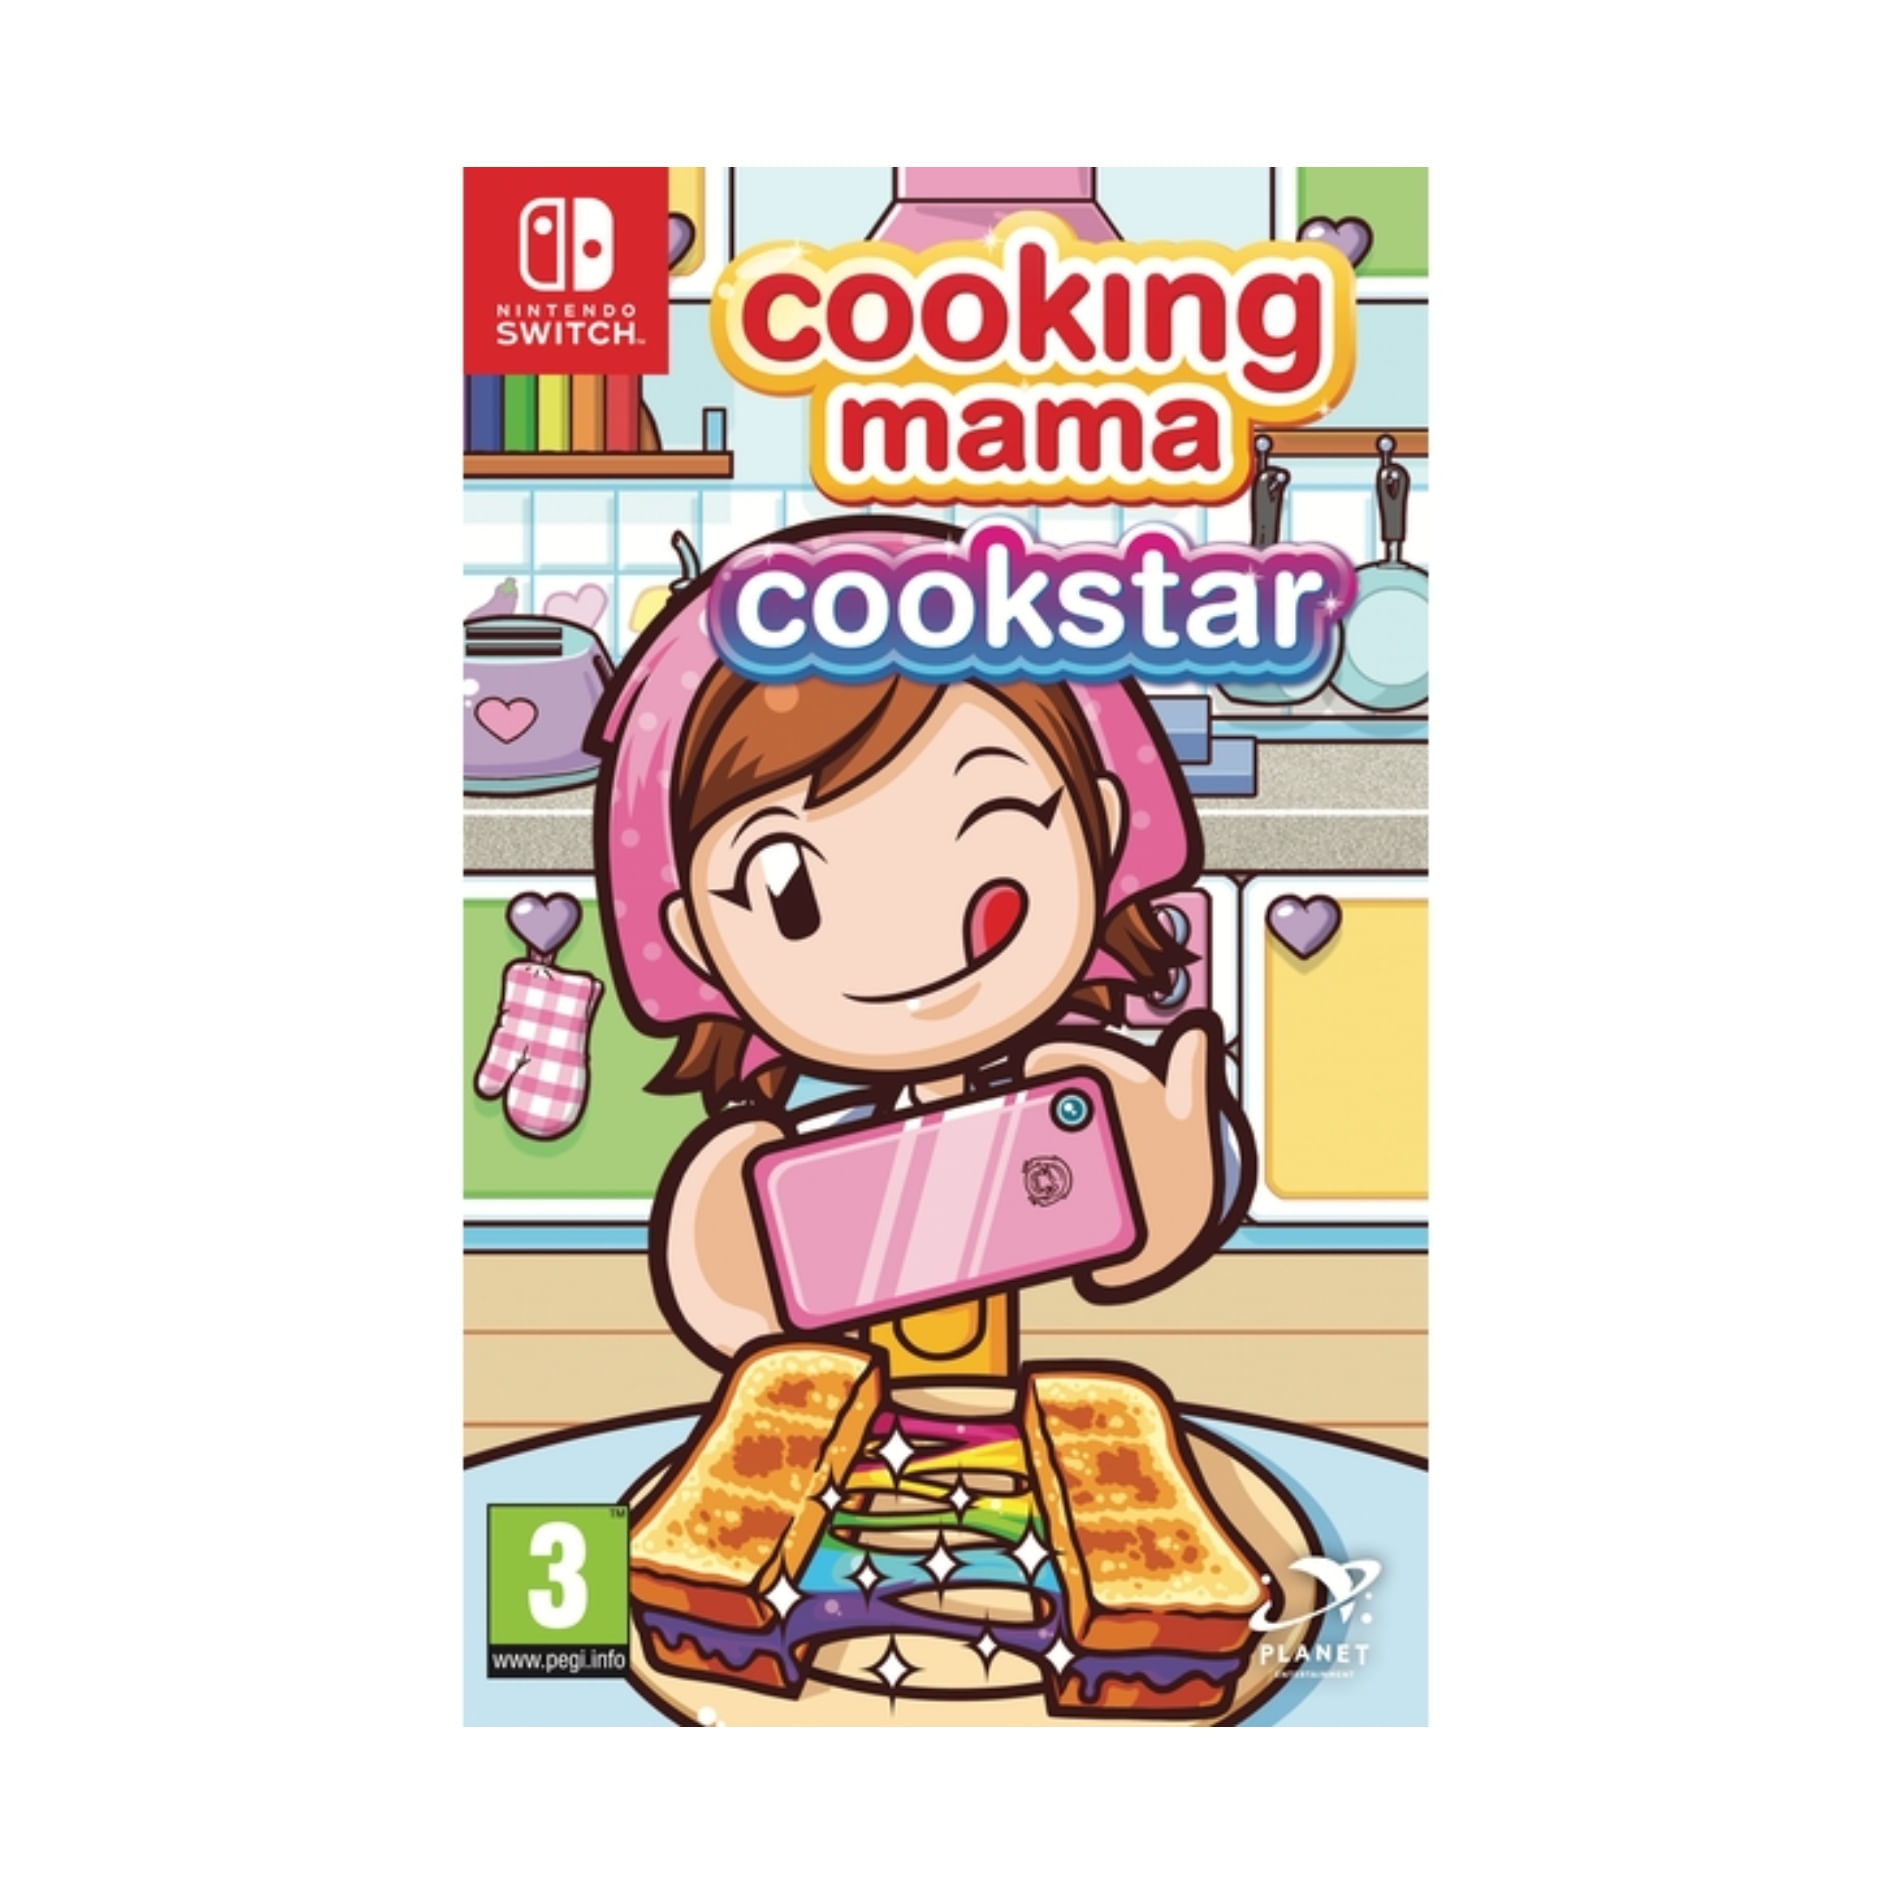 Juego Nintendo Switch Cooking Mama Cookstar